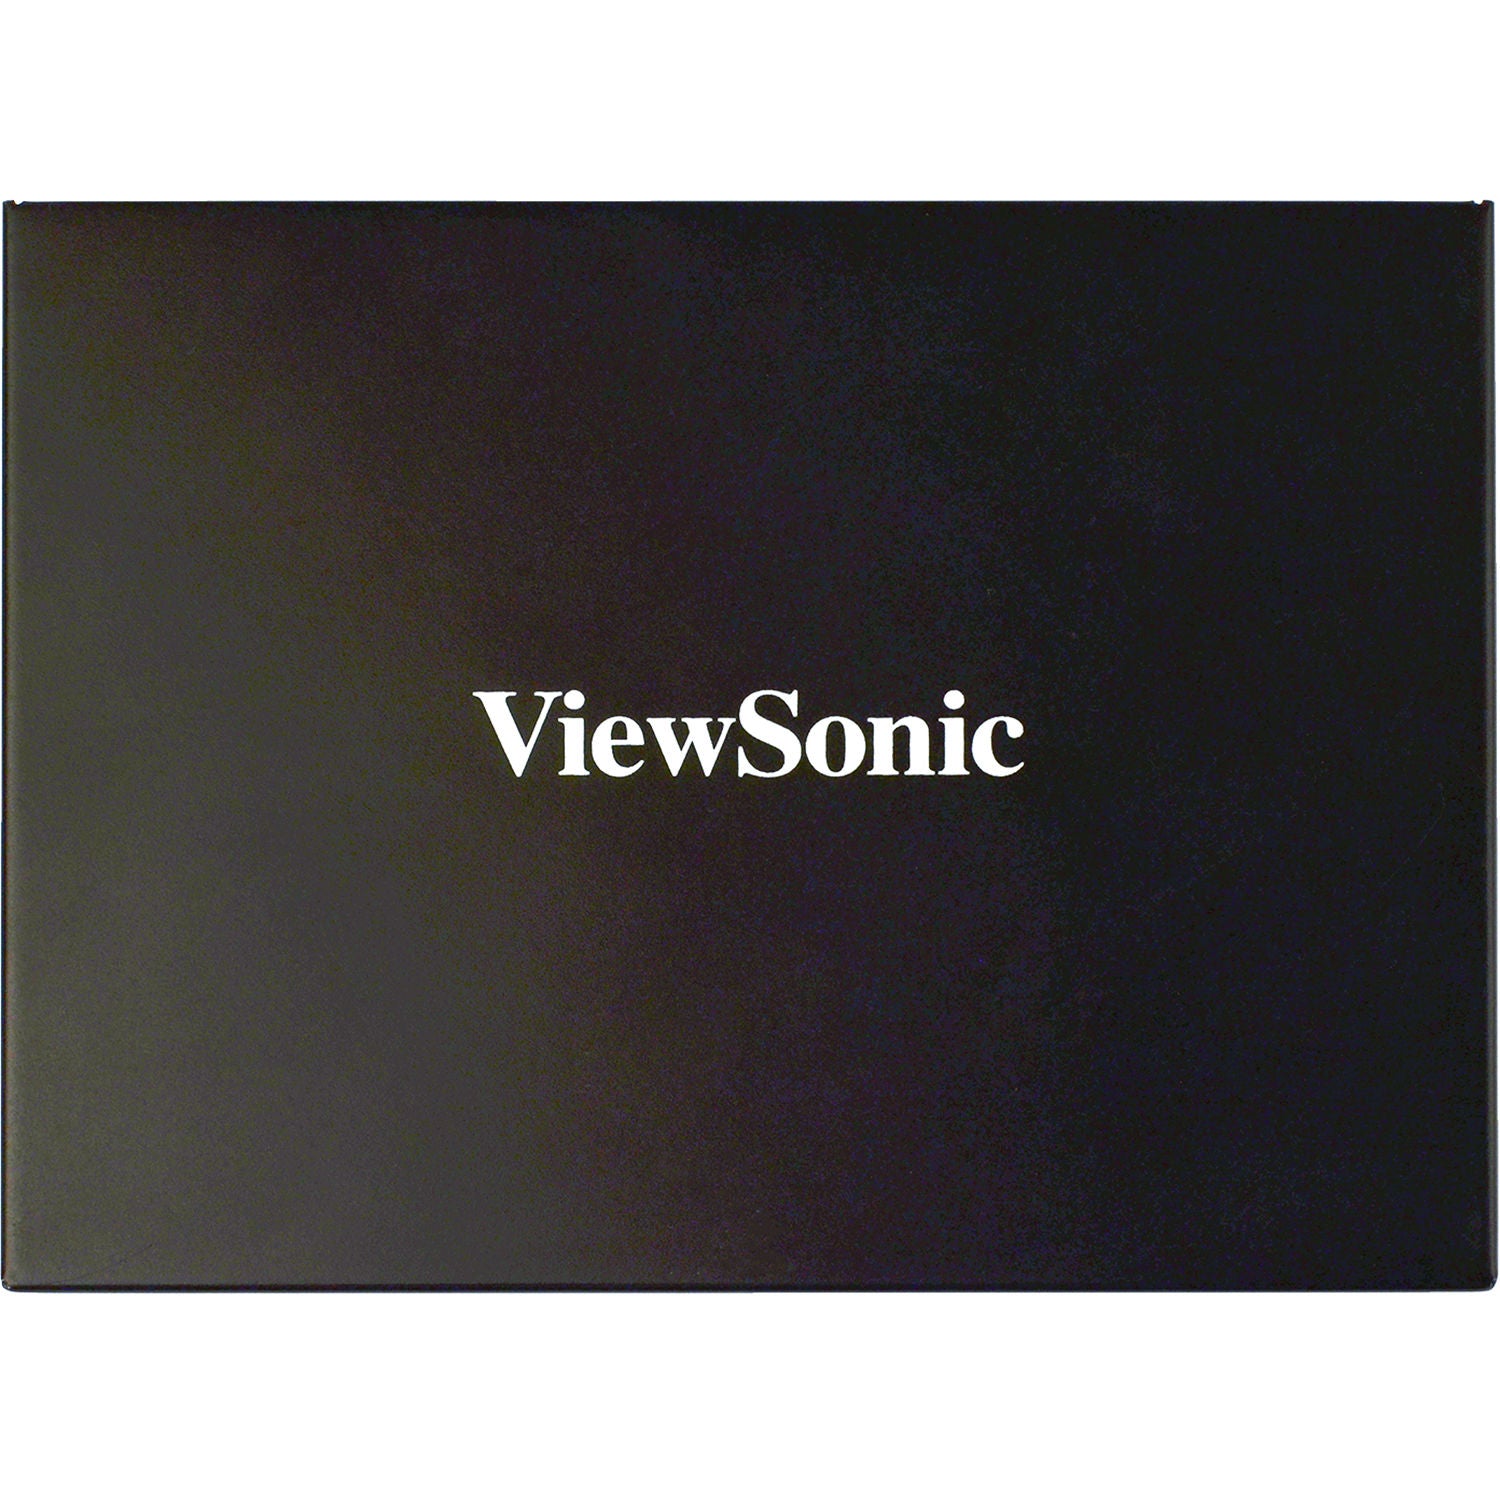 ViewSonic SC-A25X-R Network Media Player with with Displayit Xpress Software for Digital Signage - Certified Refurbished